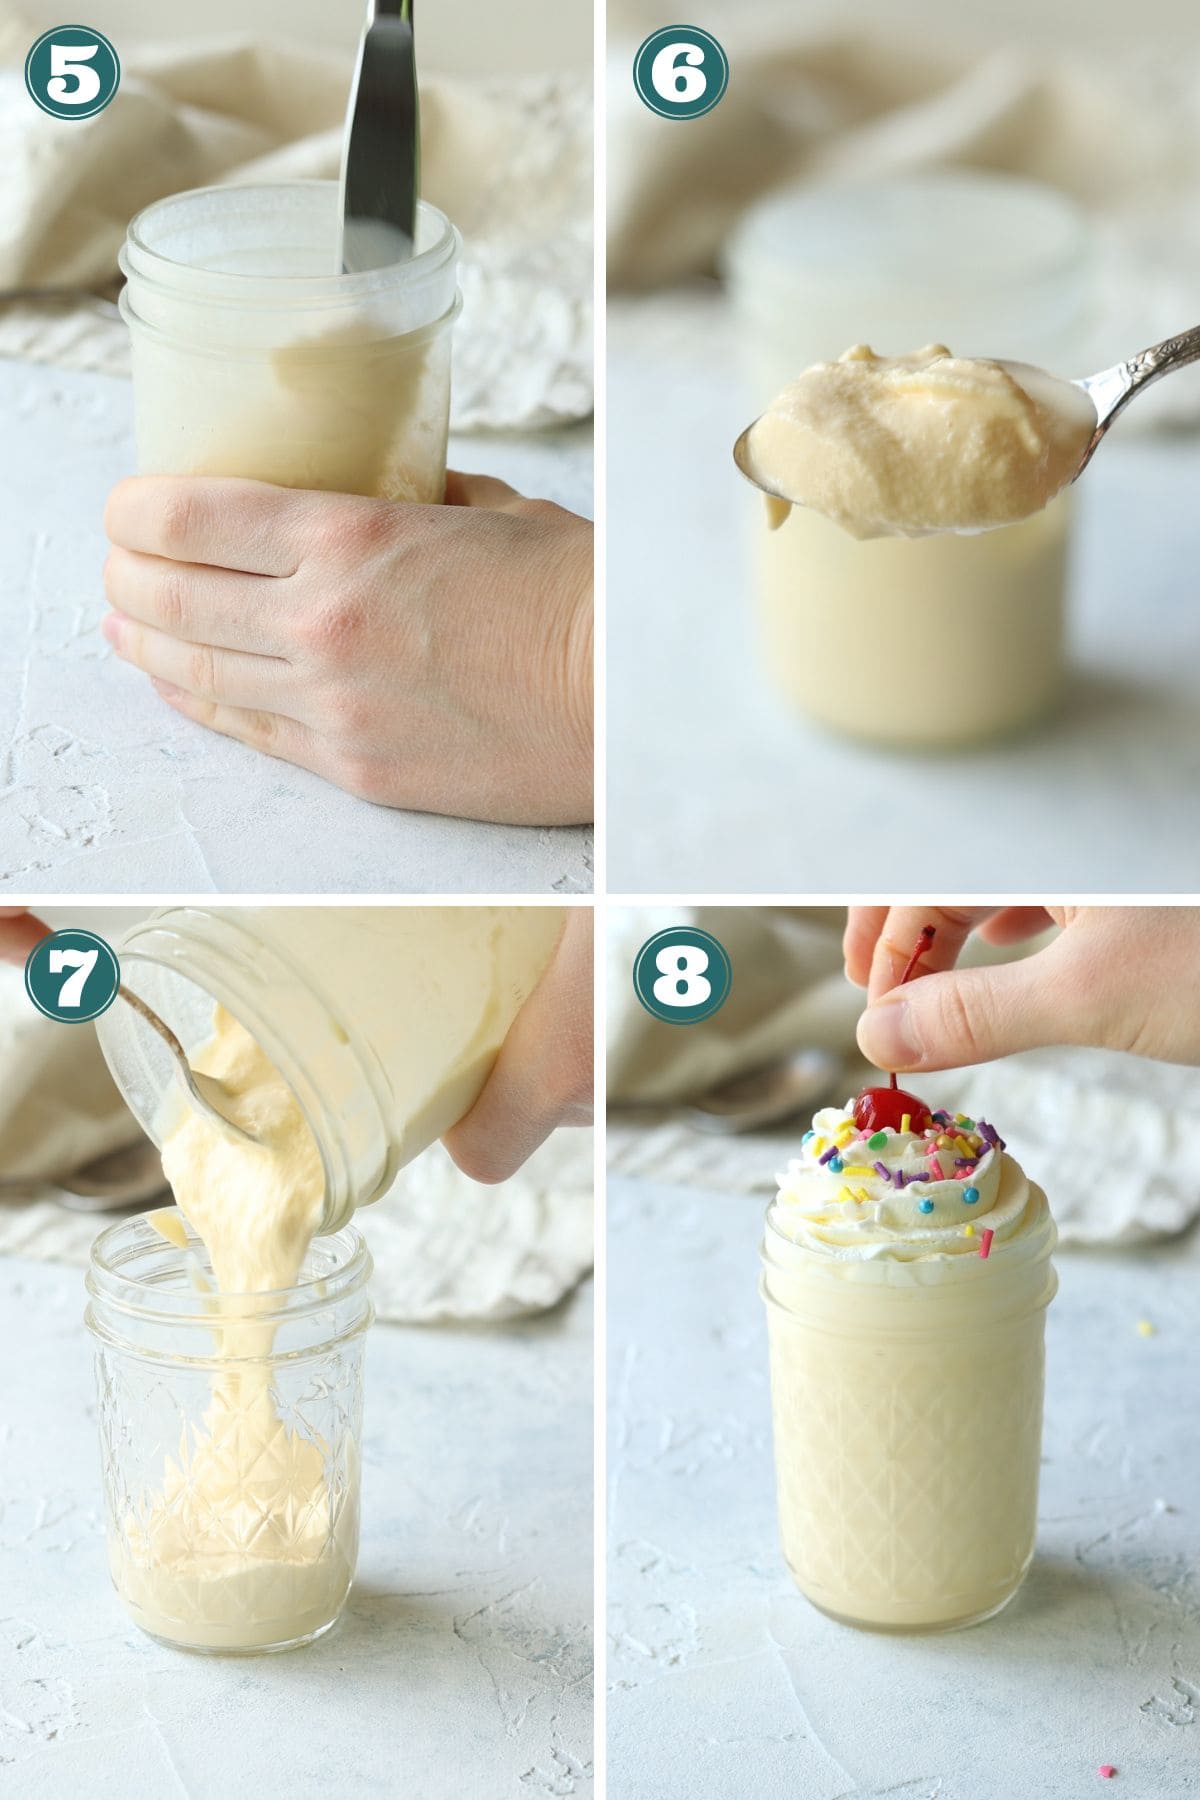 Step by step making a milkshake in a mason jar - stirring, checking texture, pouring into a glass, topping with whipped cream, sprinkles, and a cherry.